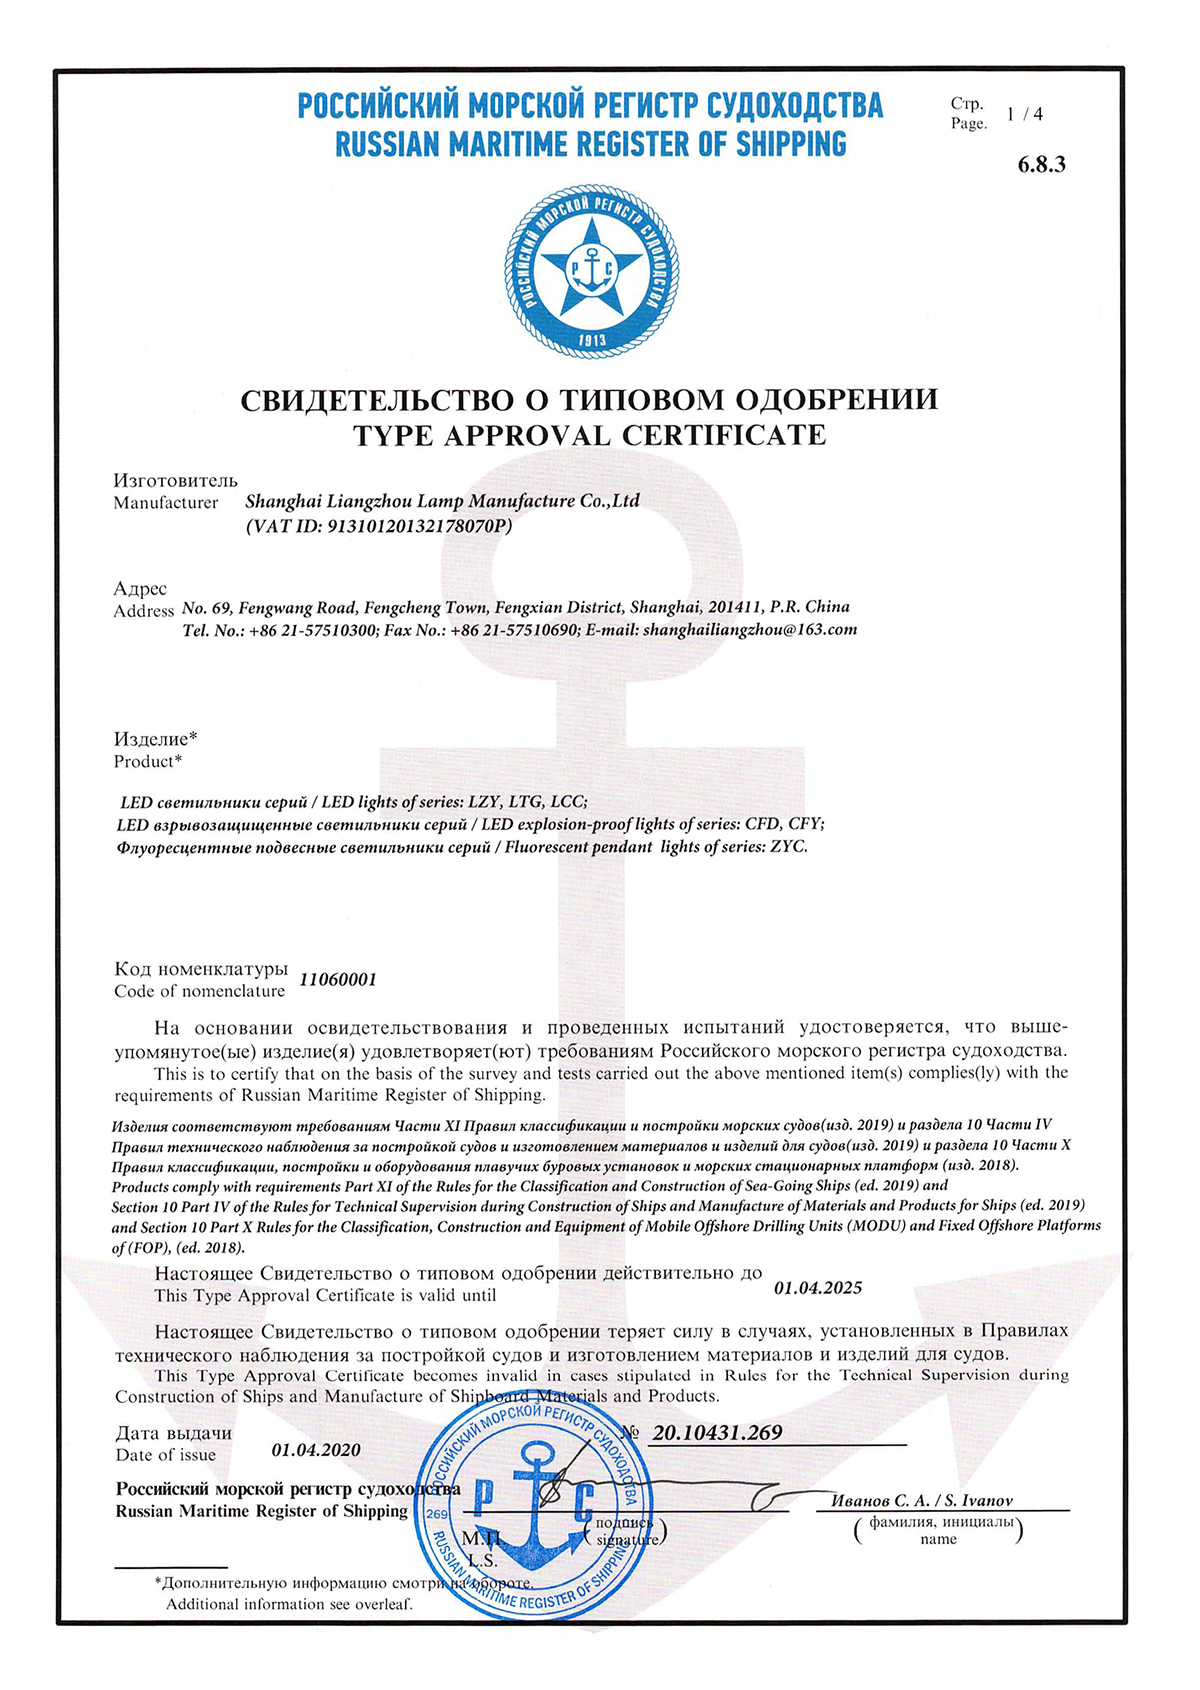 RMRS  CERTIFICATE OF TYPE APPROVAL